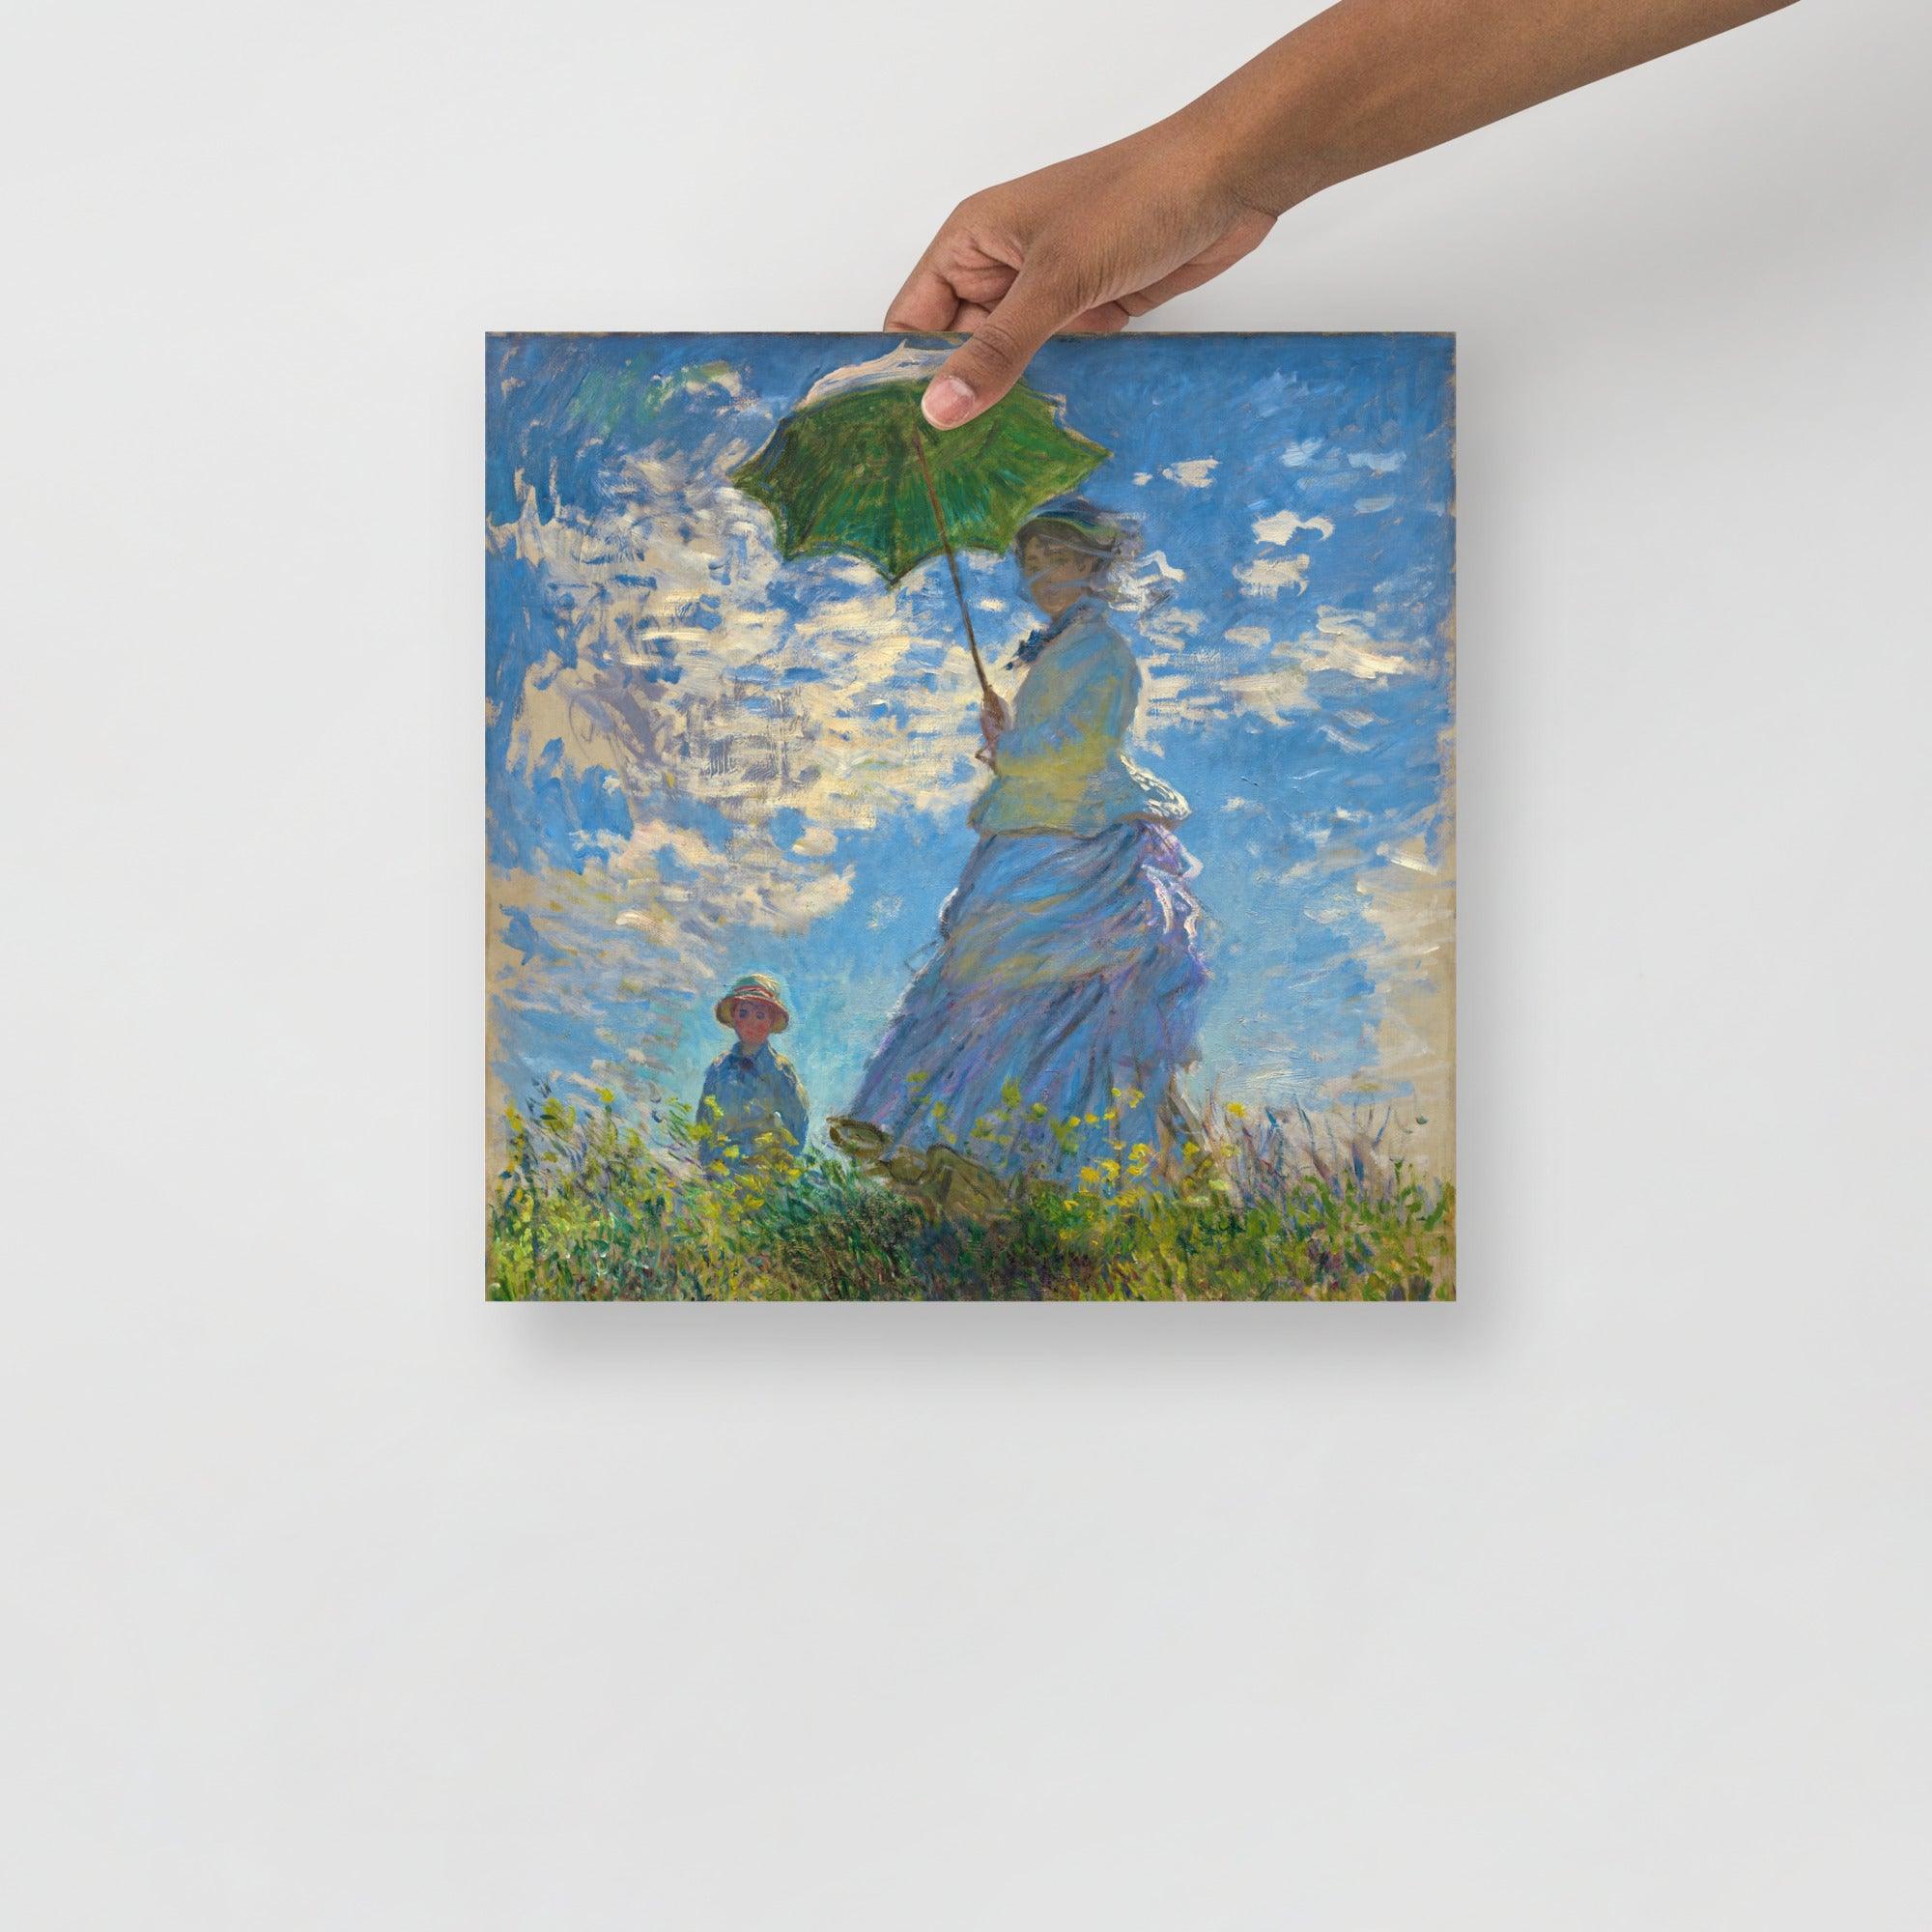 A Madame Monet and Her Son by Claude Monet poster on a plain backdrop in size 14x14”.